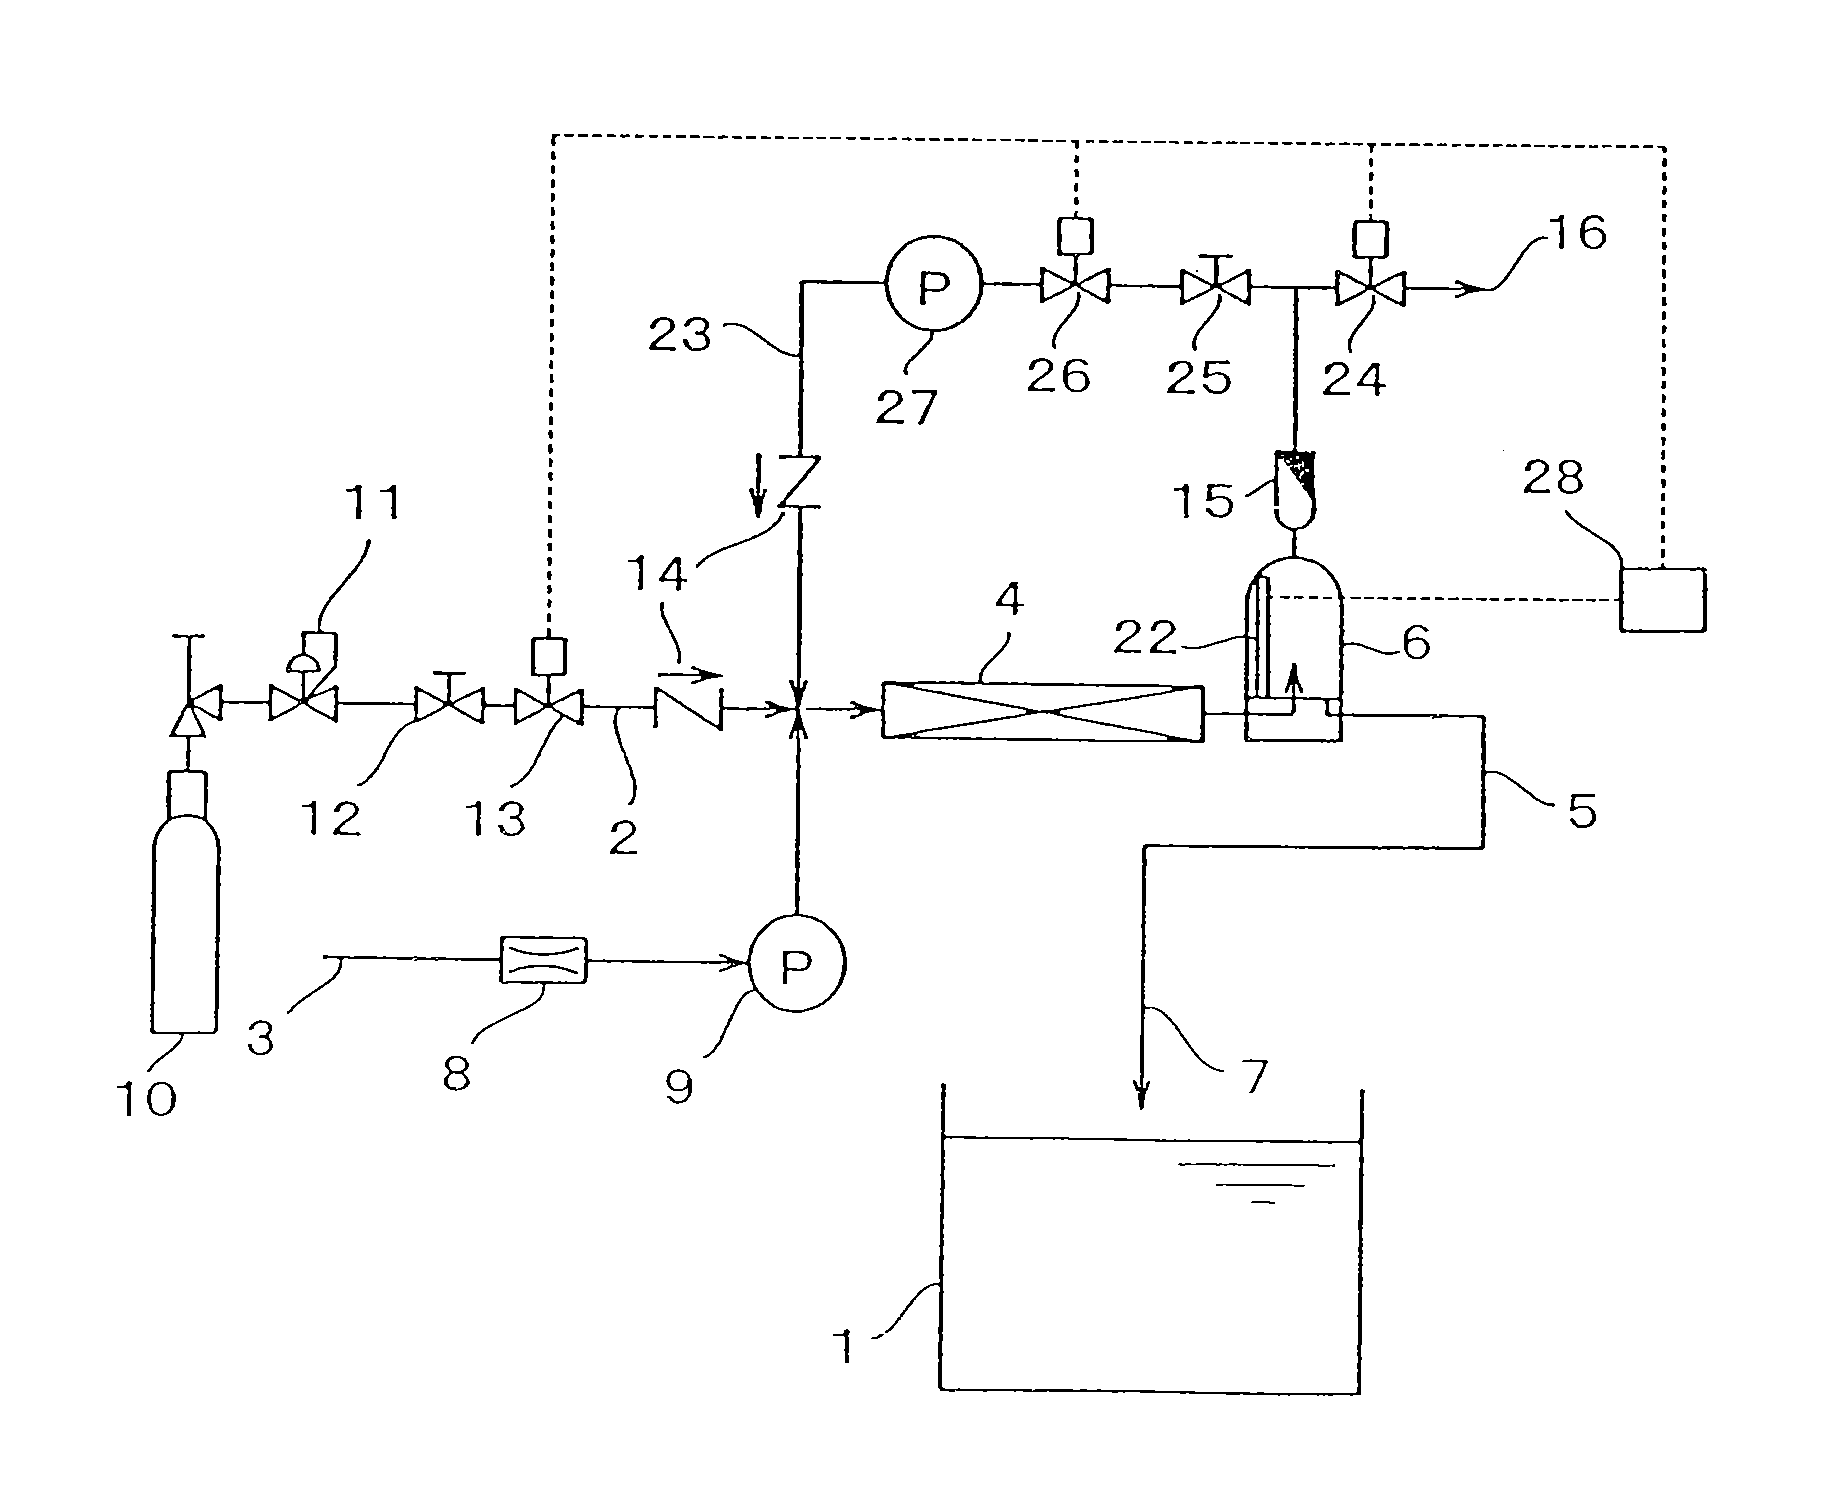 Carbonate spring producing system